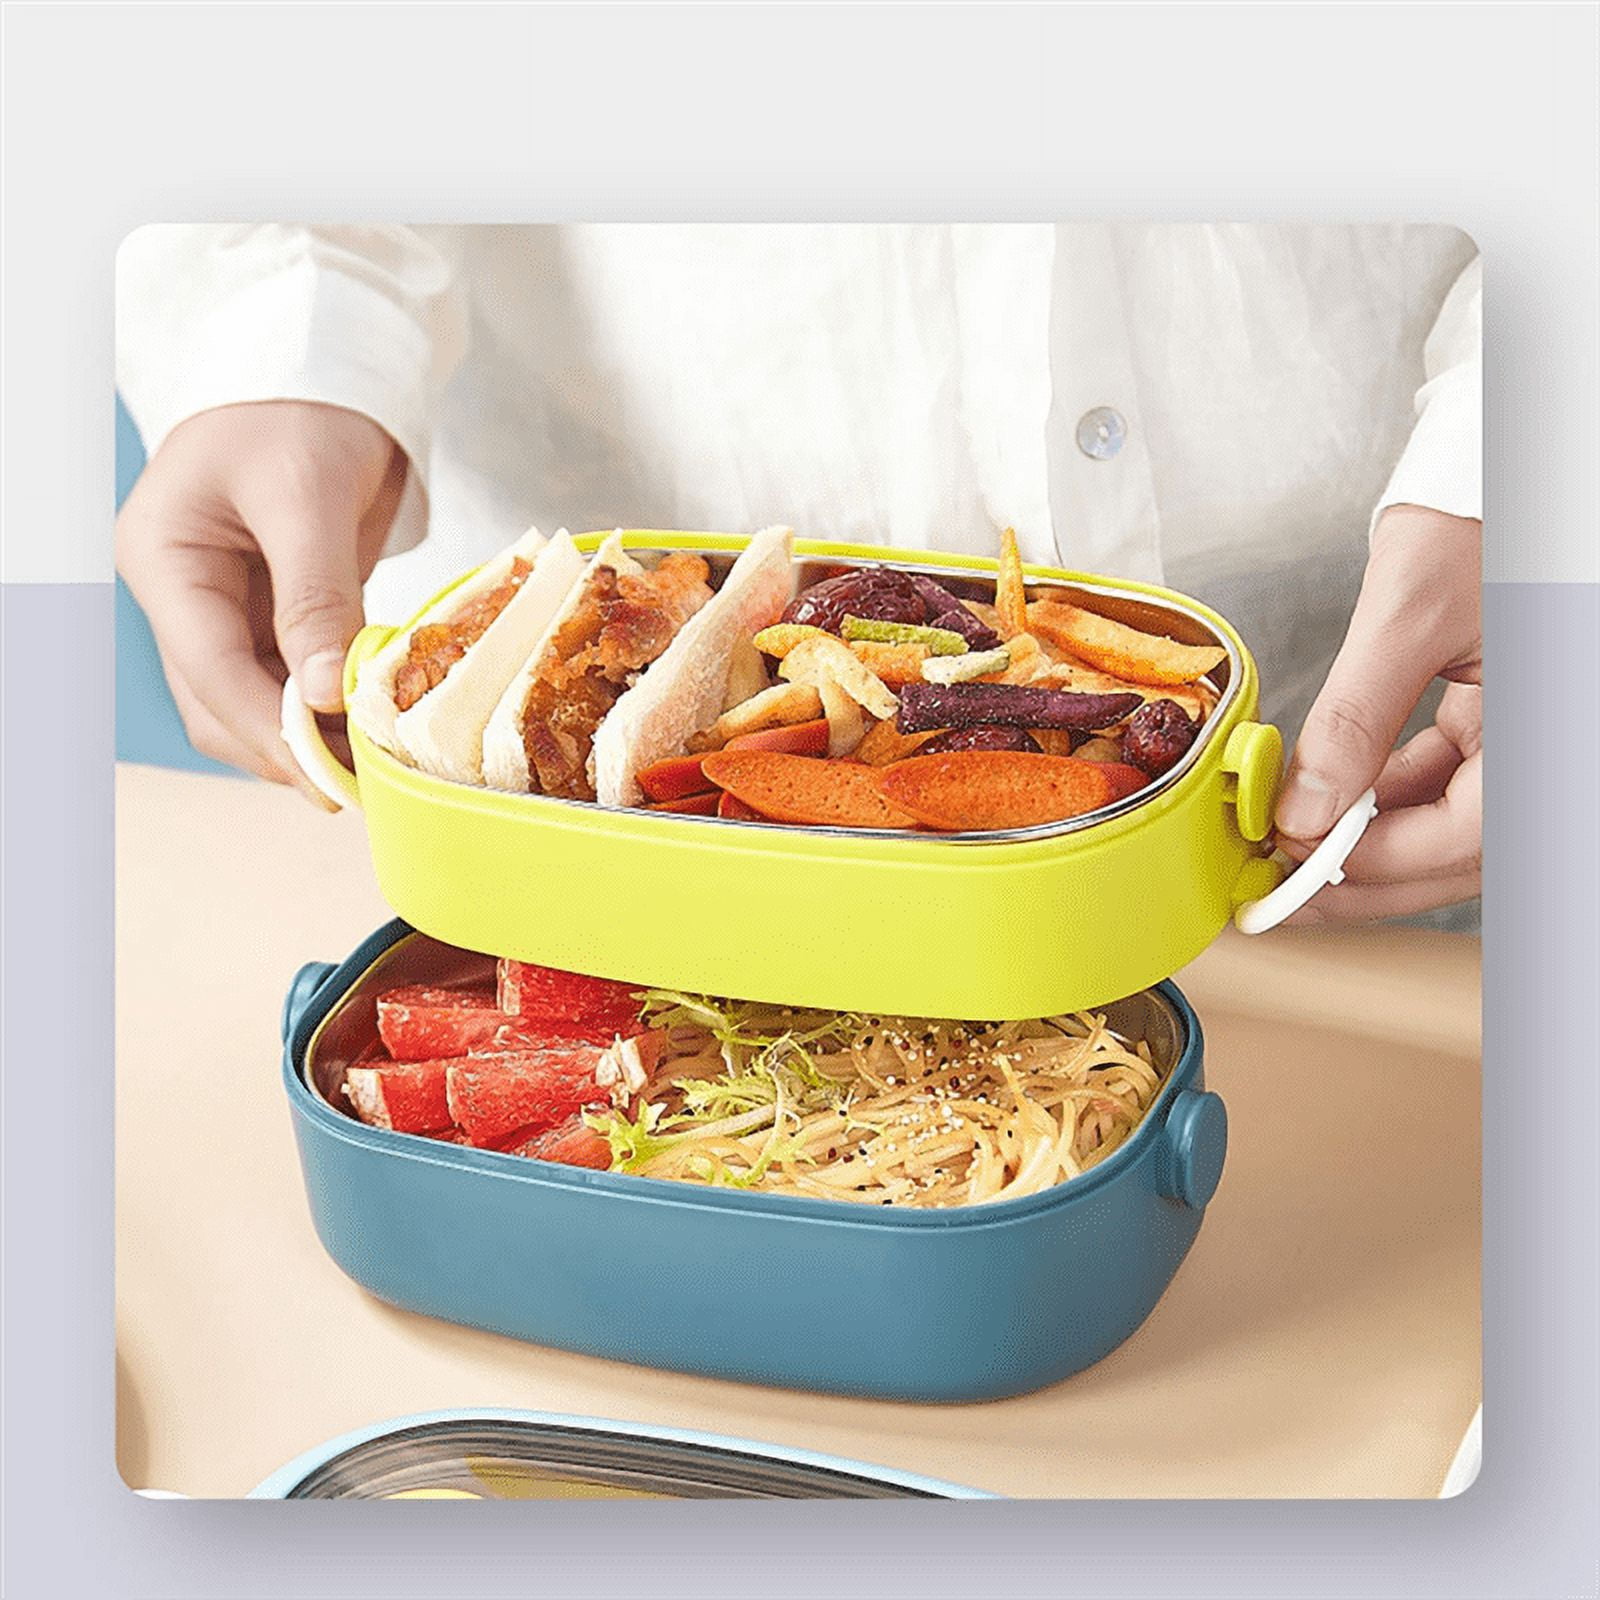 All-Inclusive Leakproof Lunch Boxes : lunch box1